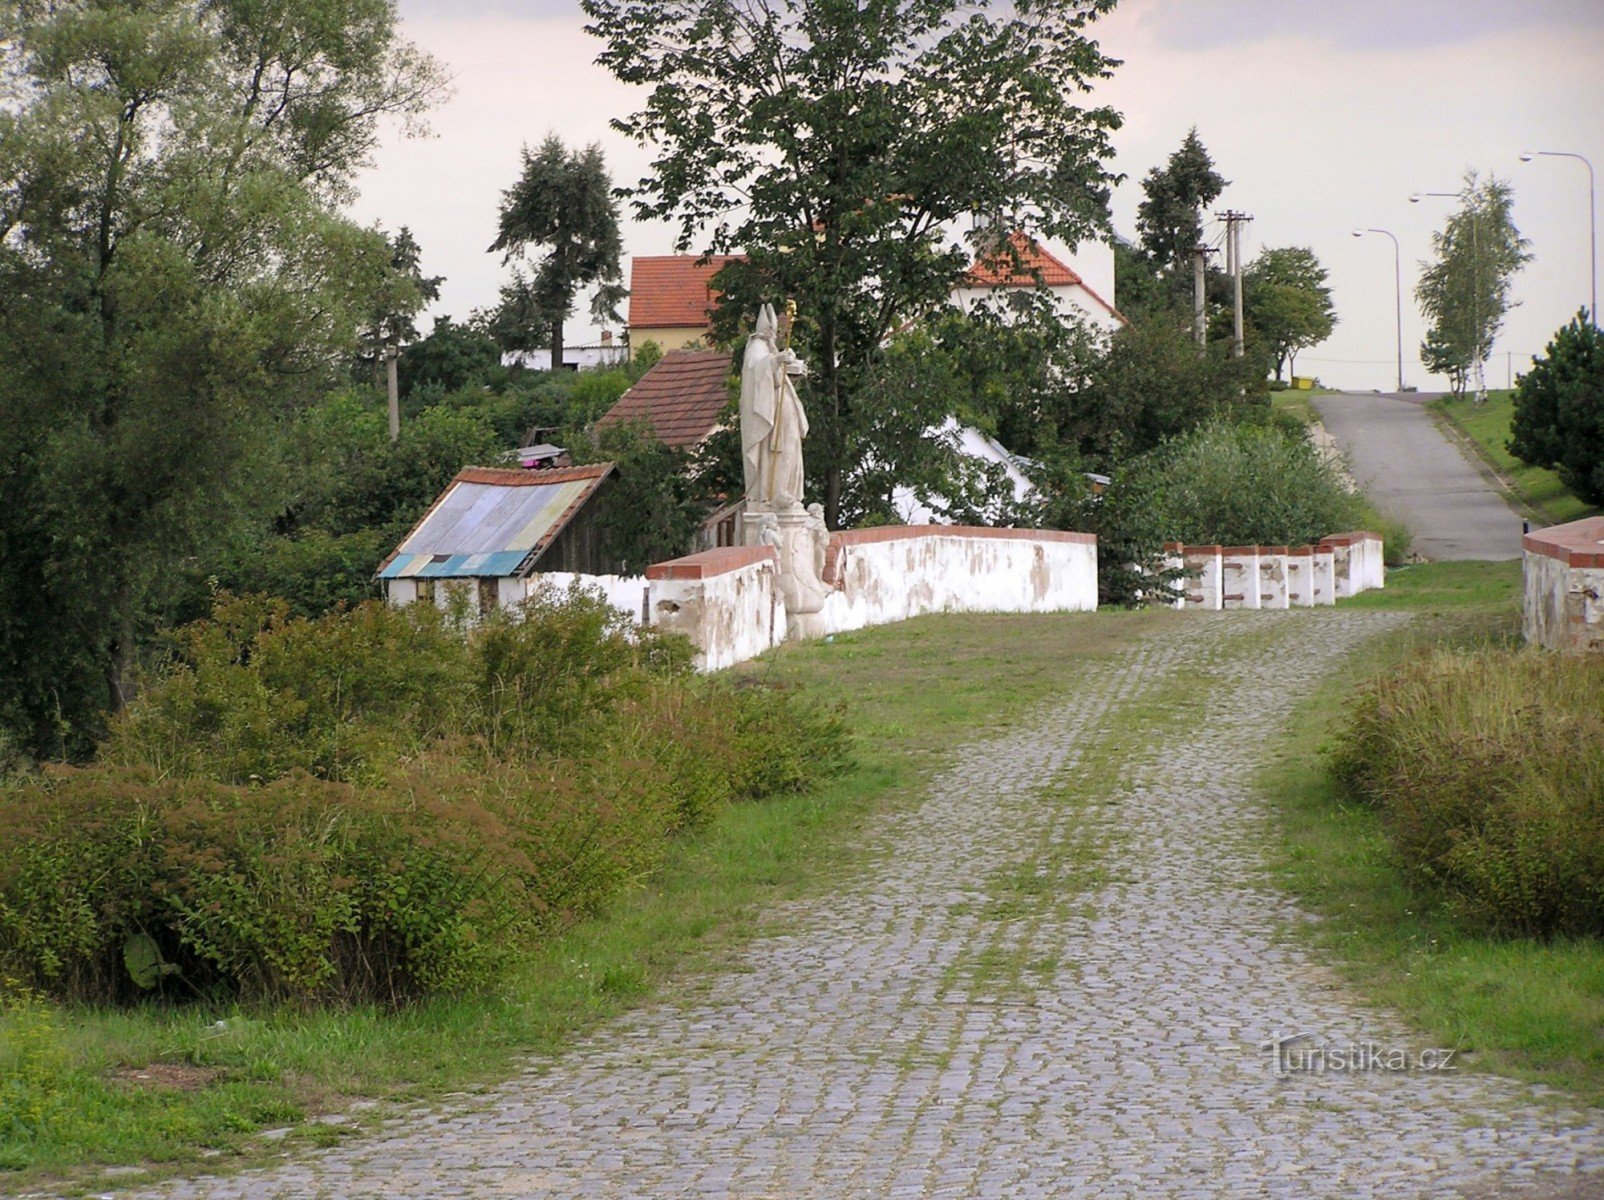 a well-preserved section of the old imperial paved road with a bridge (a statue of St. Nicholas on it)